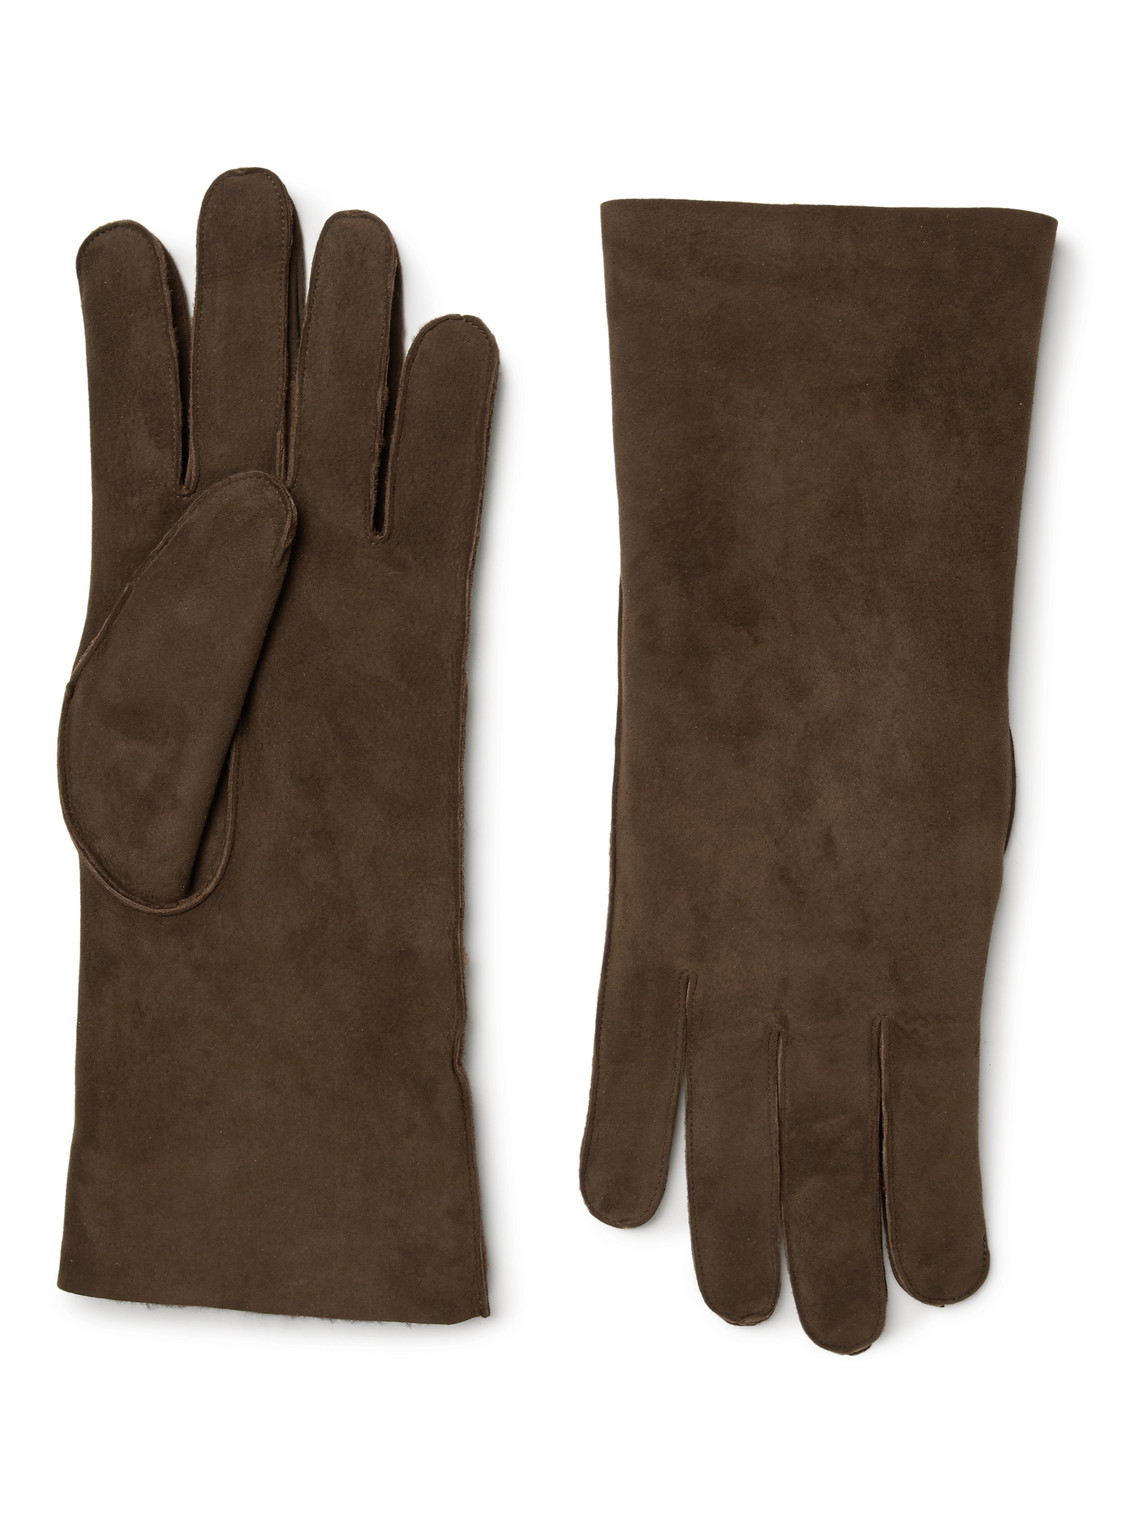 Shearling Gloves